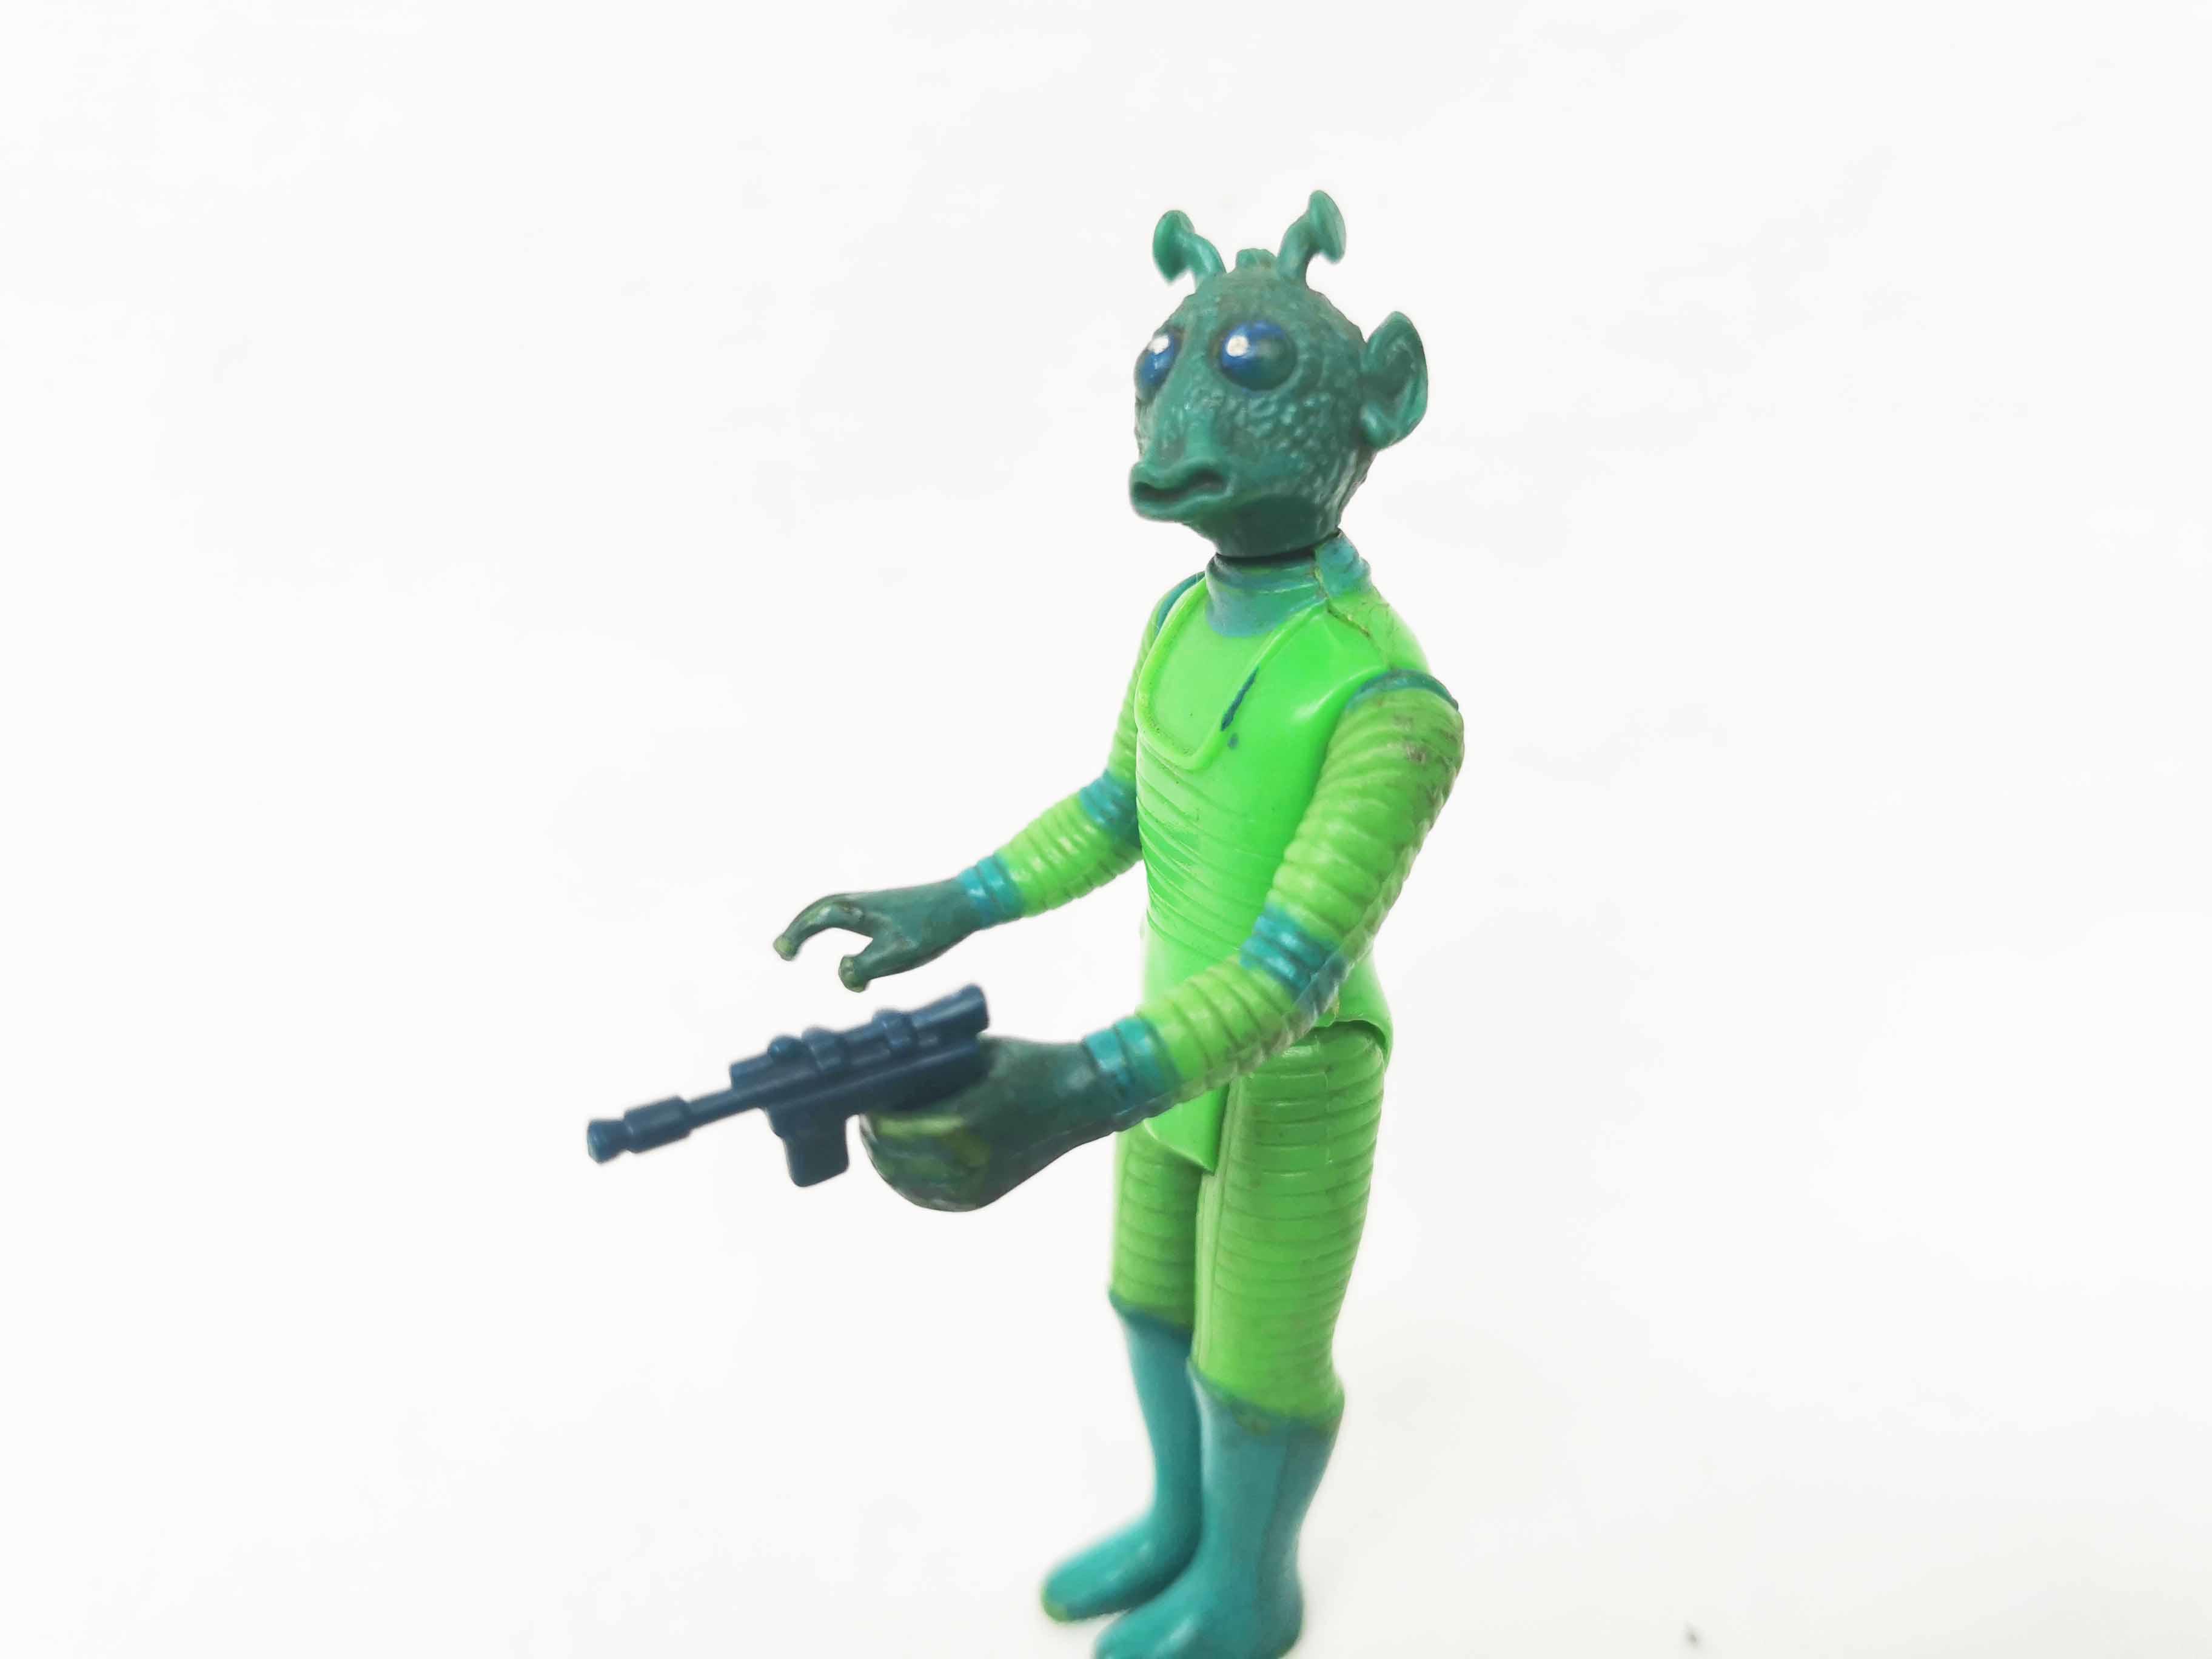 Greedo with Repro Blaster Star Wars 3.75 Action Figure Vintage